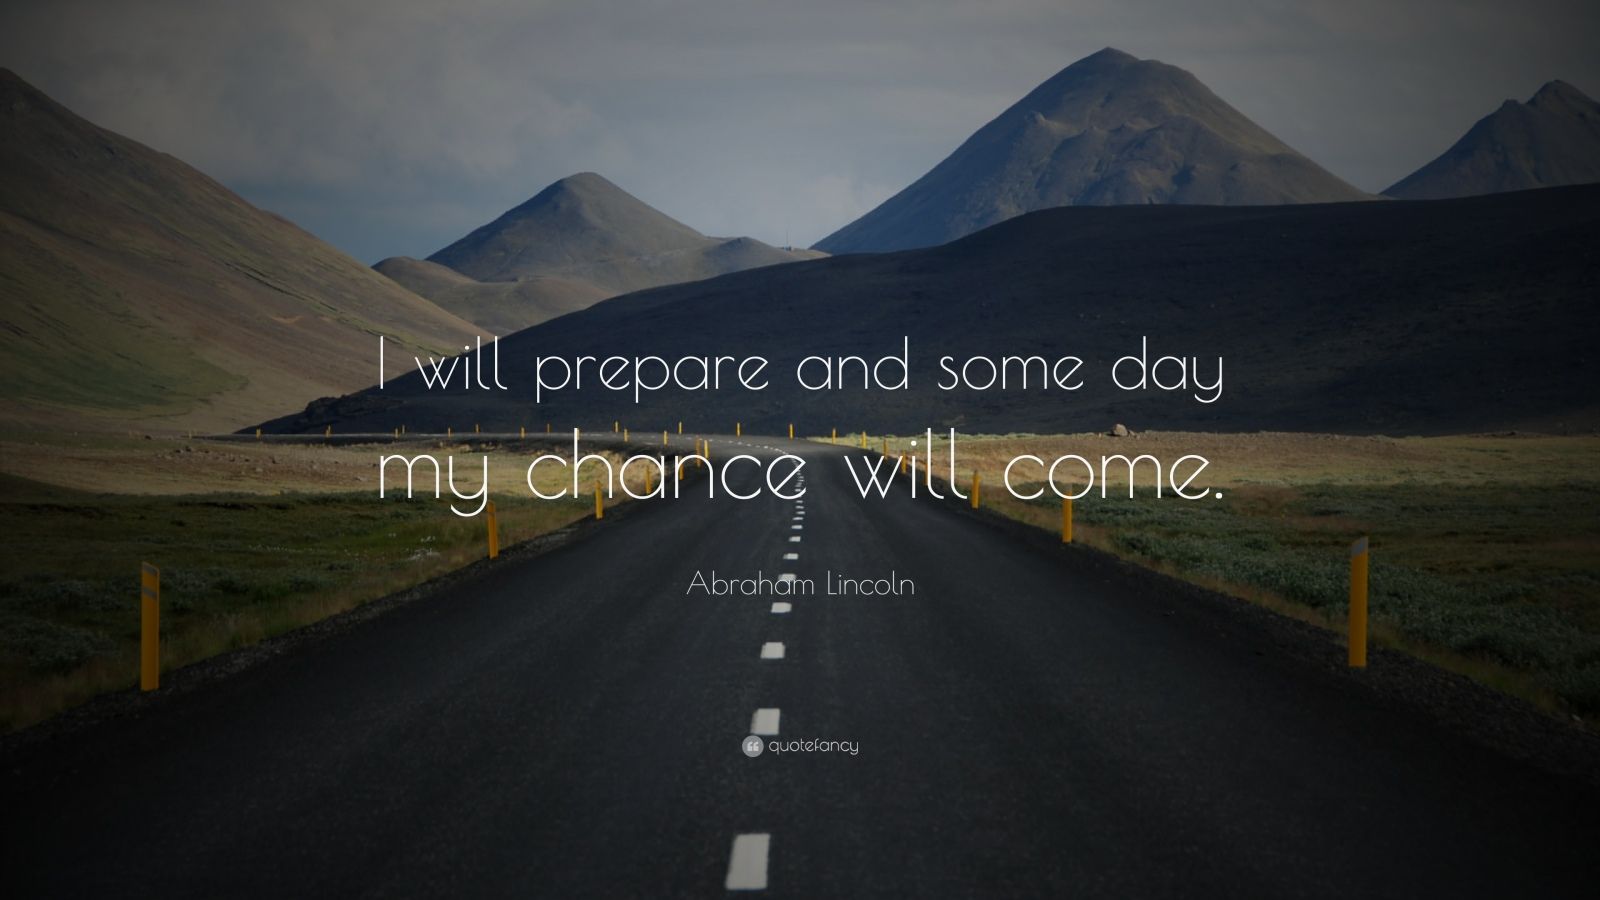 Abraham Lincoln Quote: “I will prepare and some day my chance will come ...